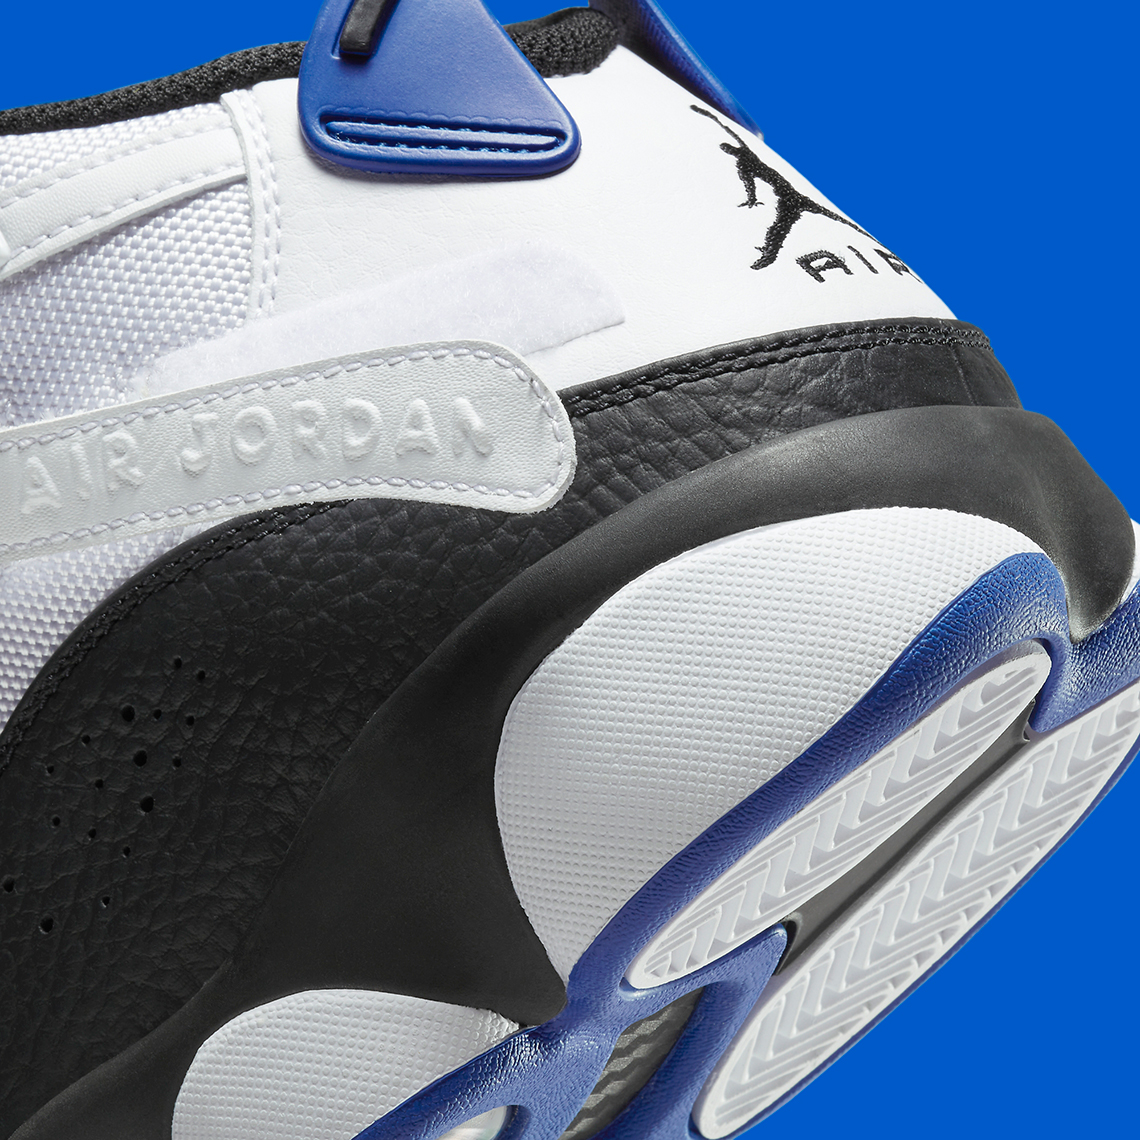 As Jordan Brand continues to expand on their upcoming Black White Game Royal 322992 142 4